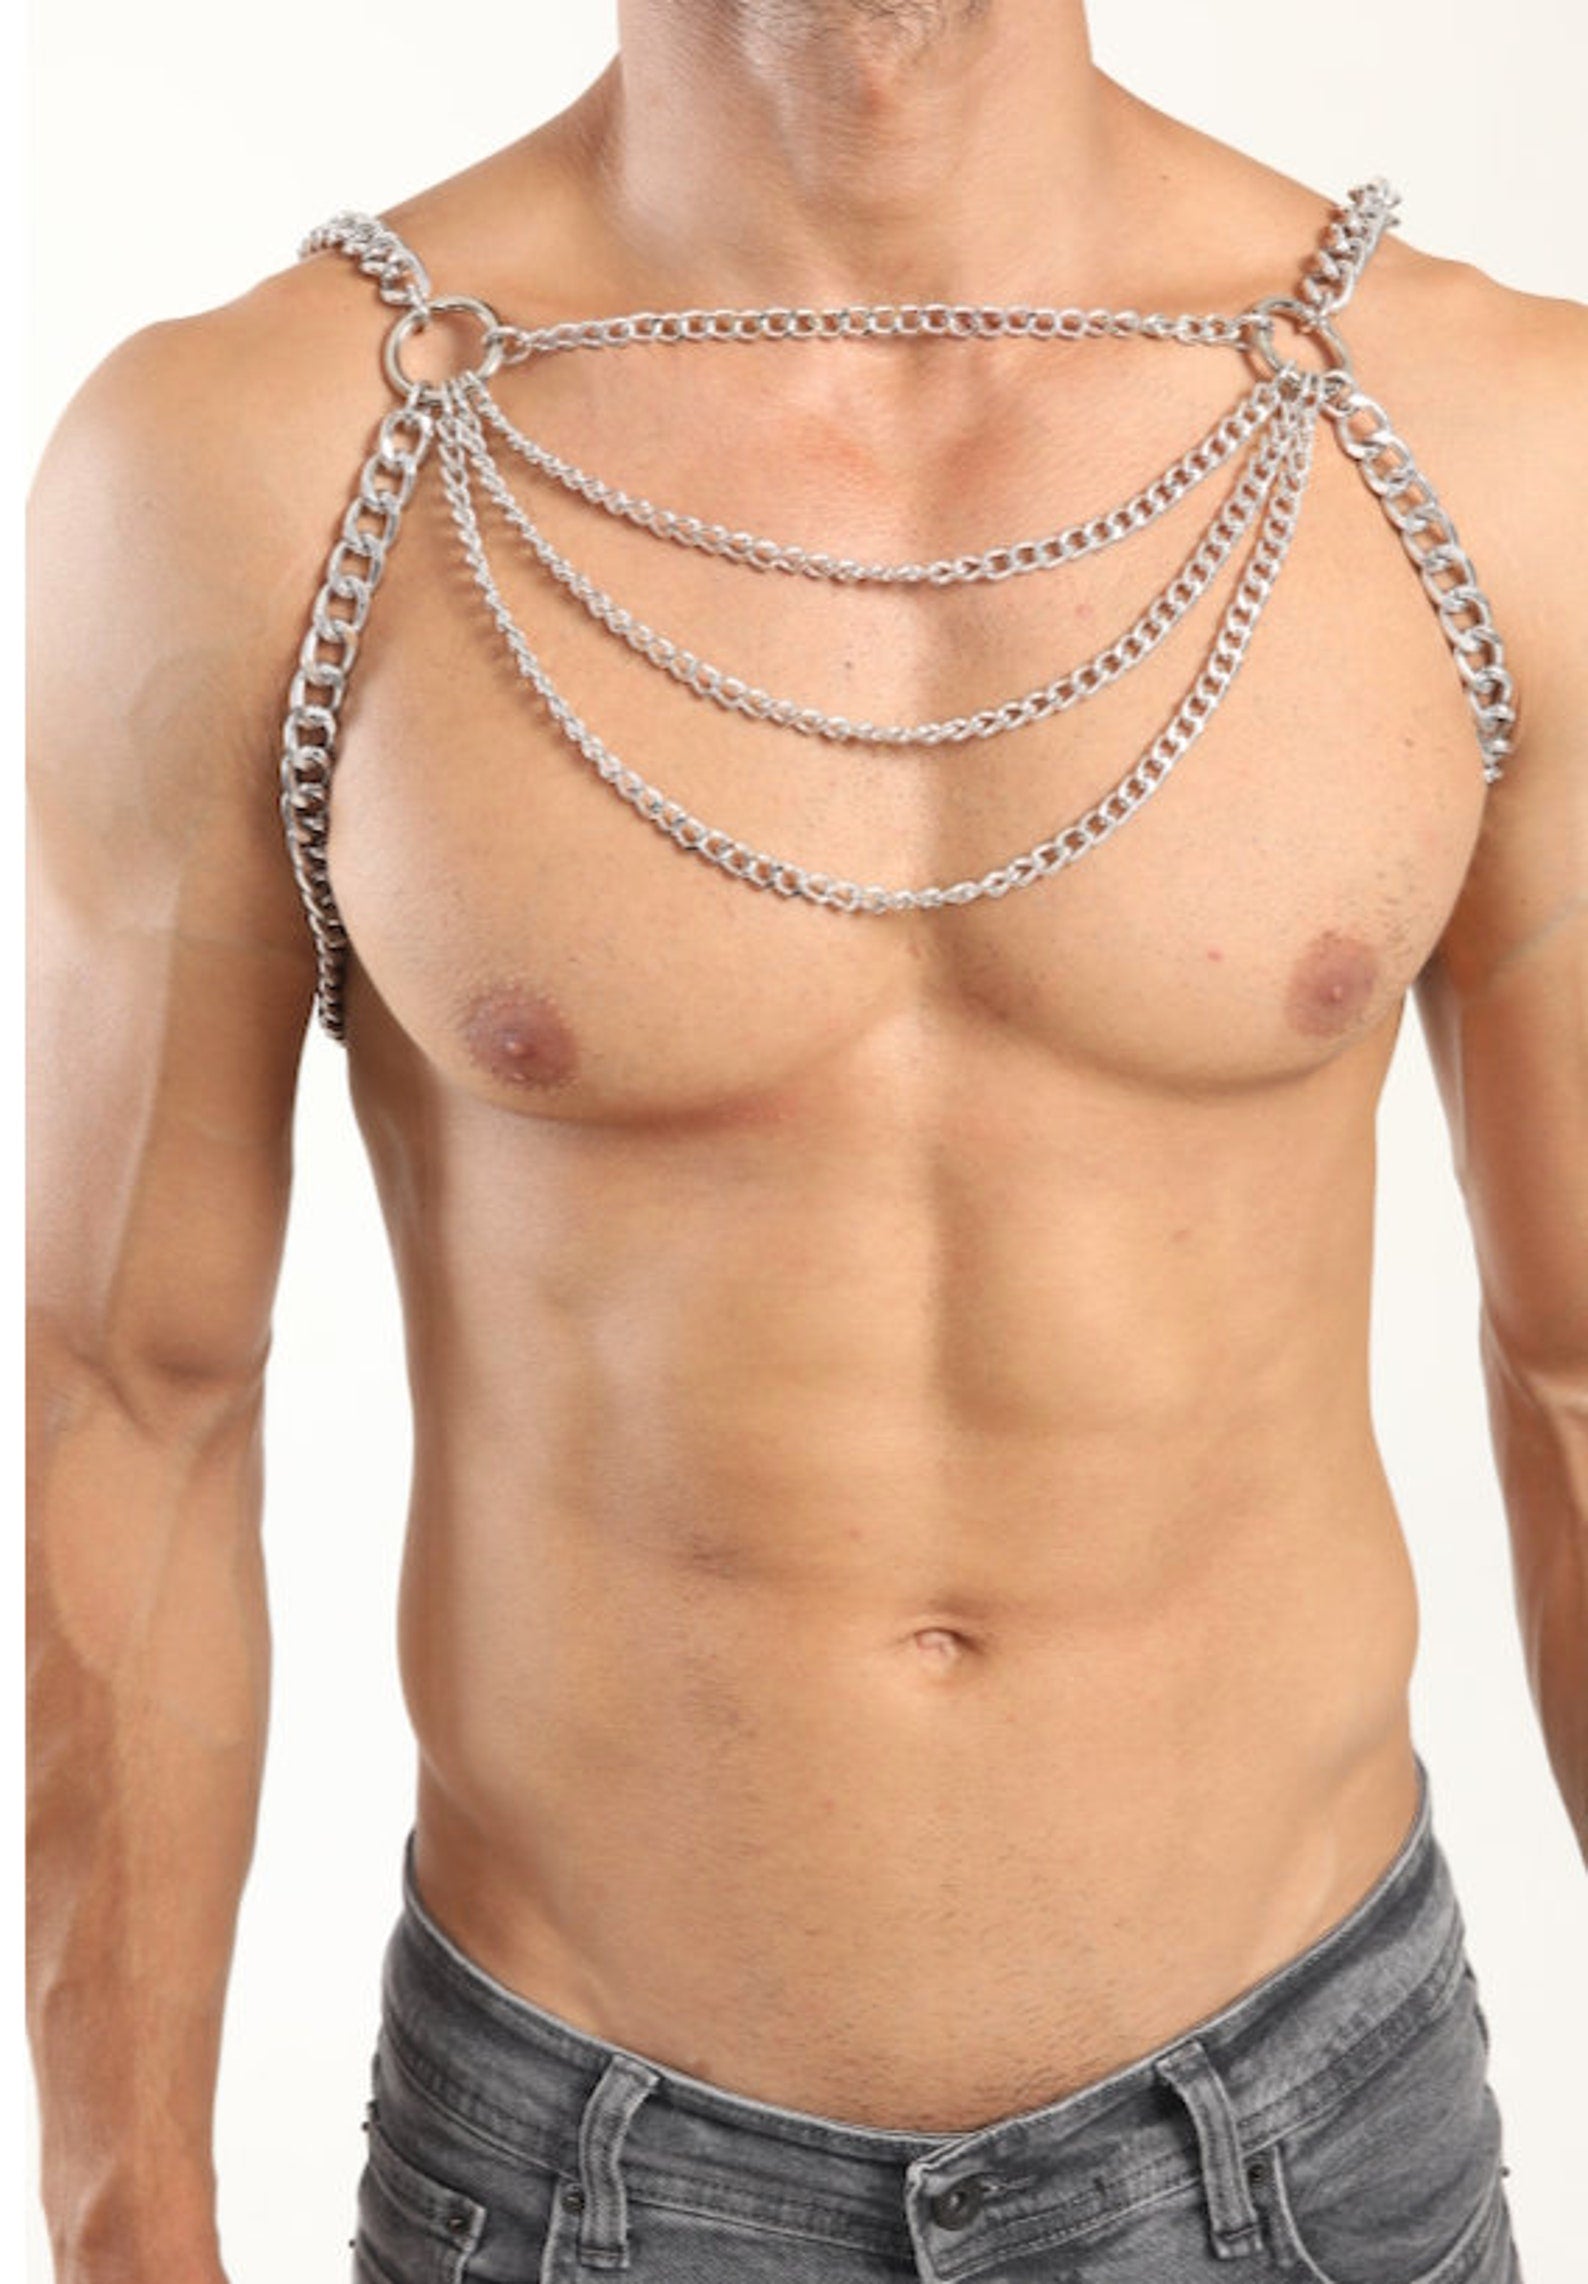 Chain Chest Harness